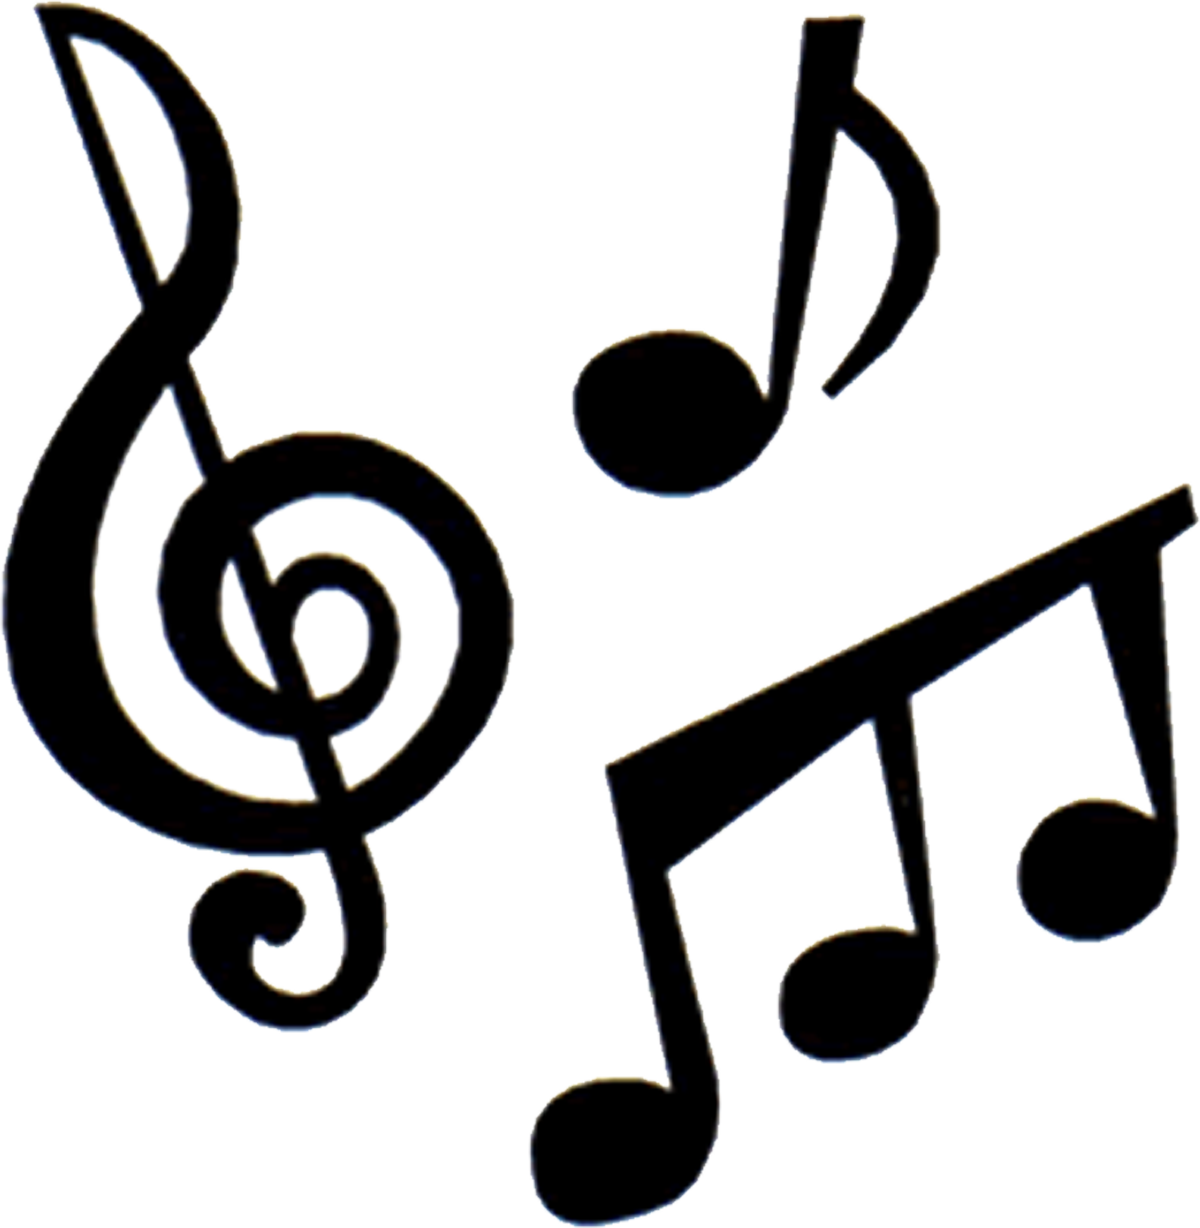 Band musical instruments clipart 